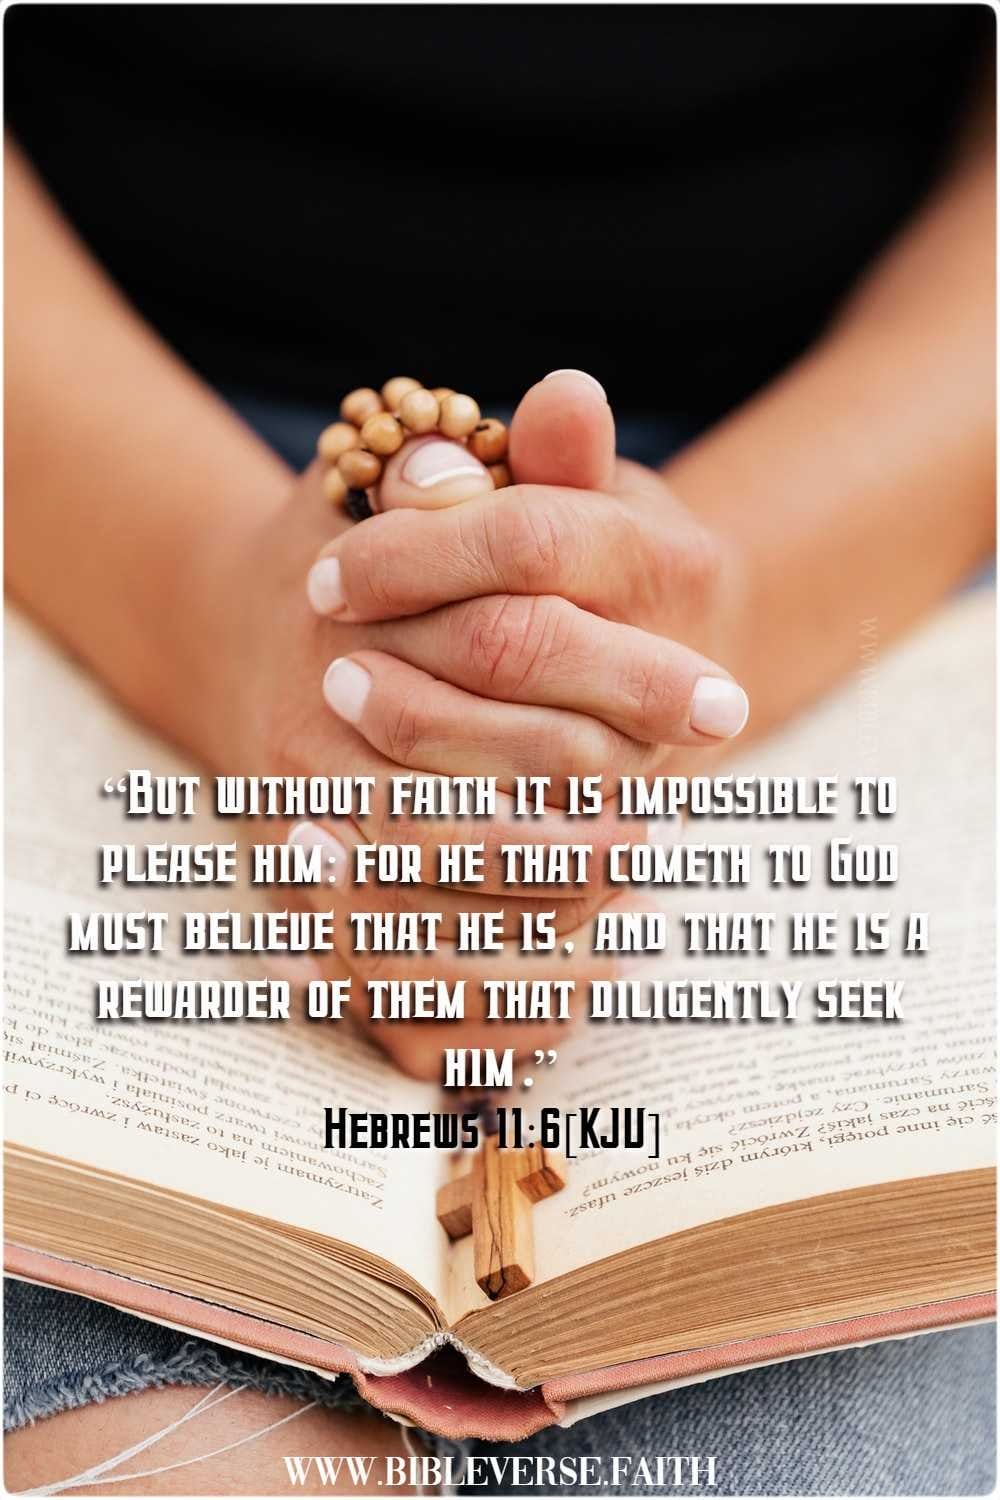 hebrews 11 6[kjv] without faith it is impossible to please god